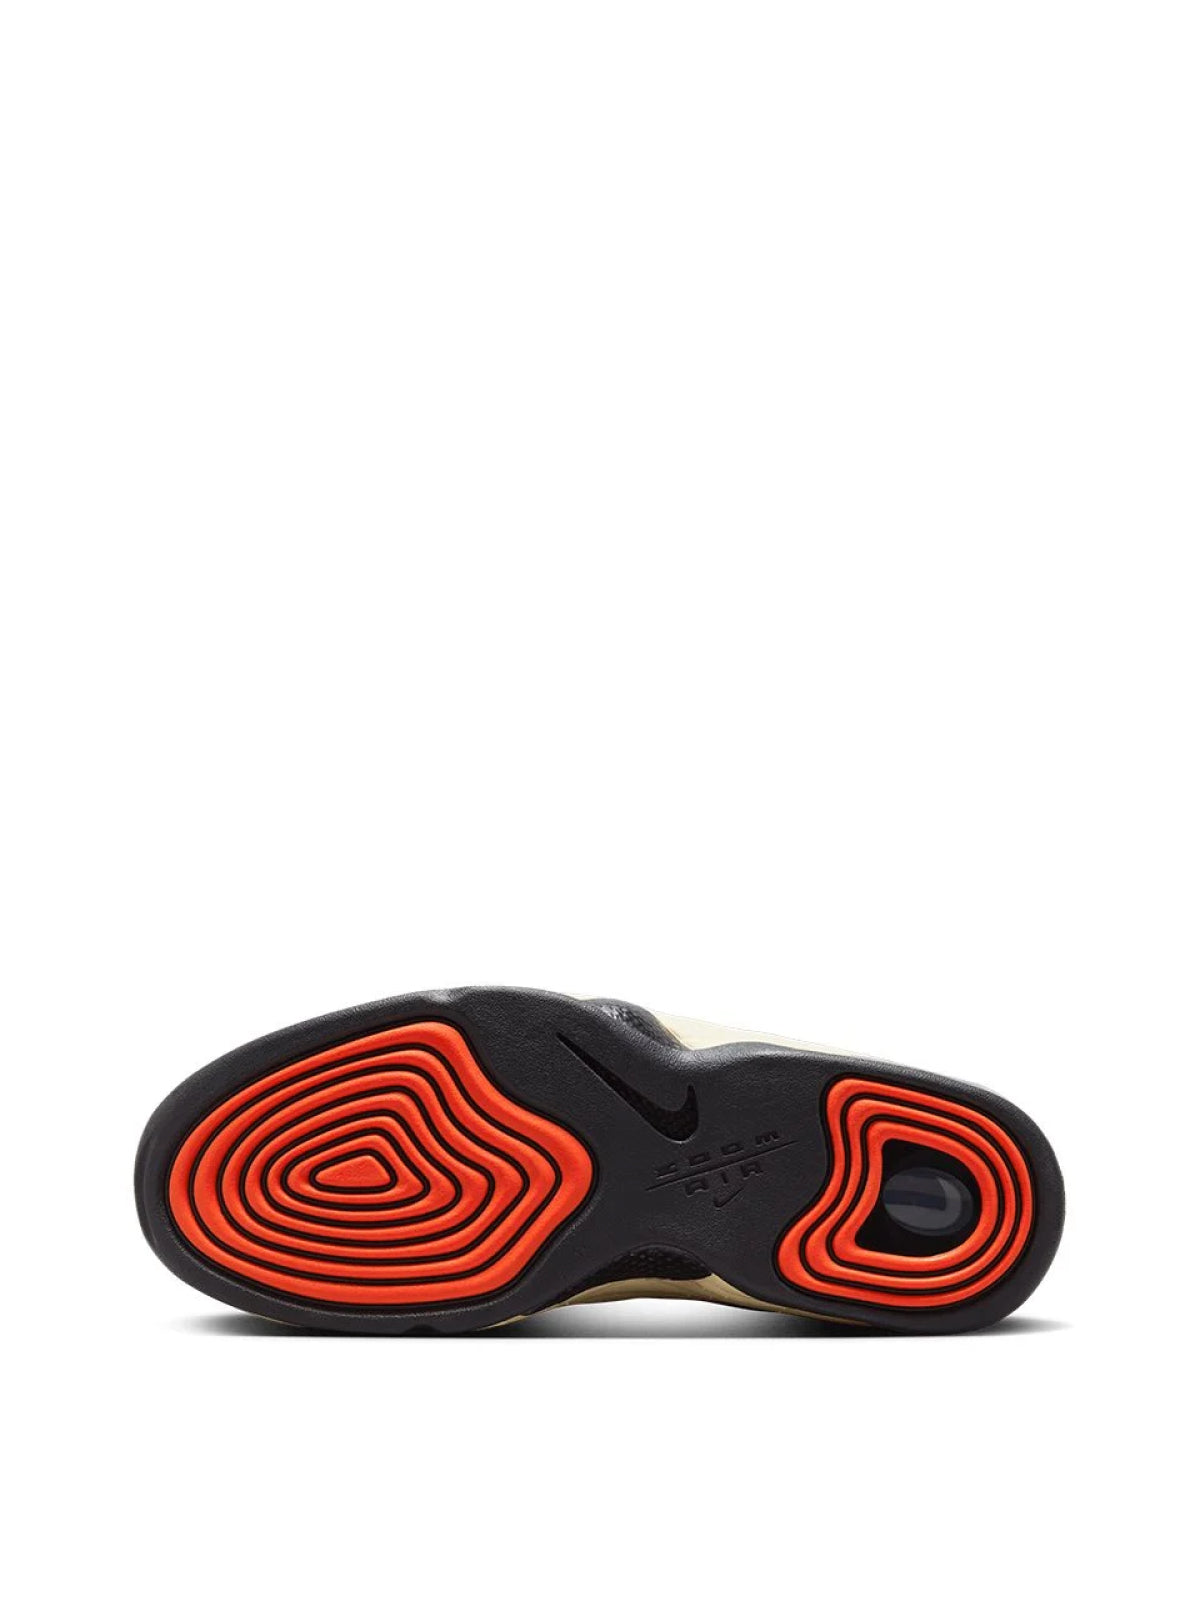 Nike-OUTLET-SALE-Air Max Penny Sneakers-ARCHIVIST